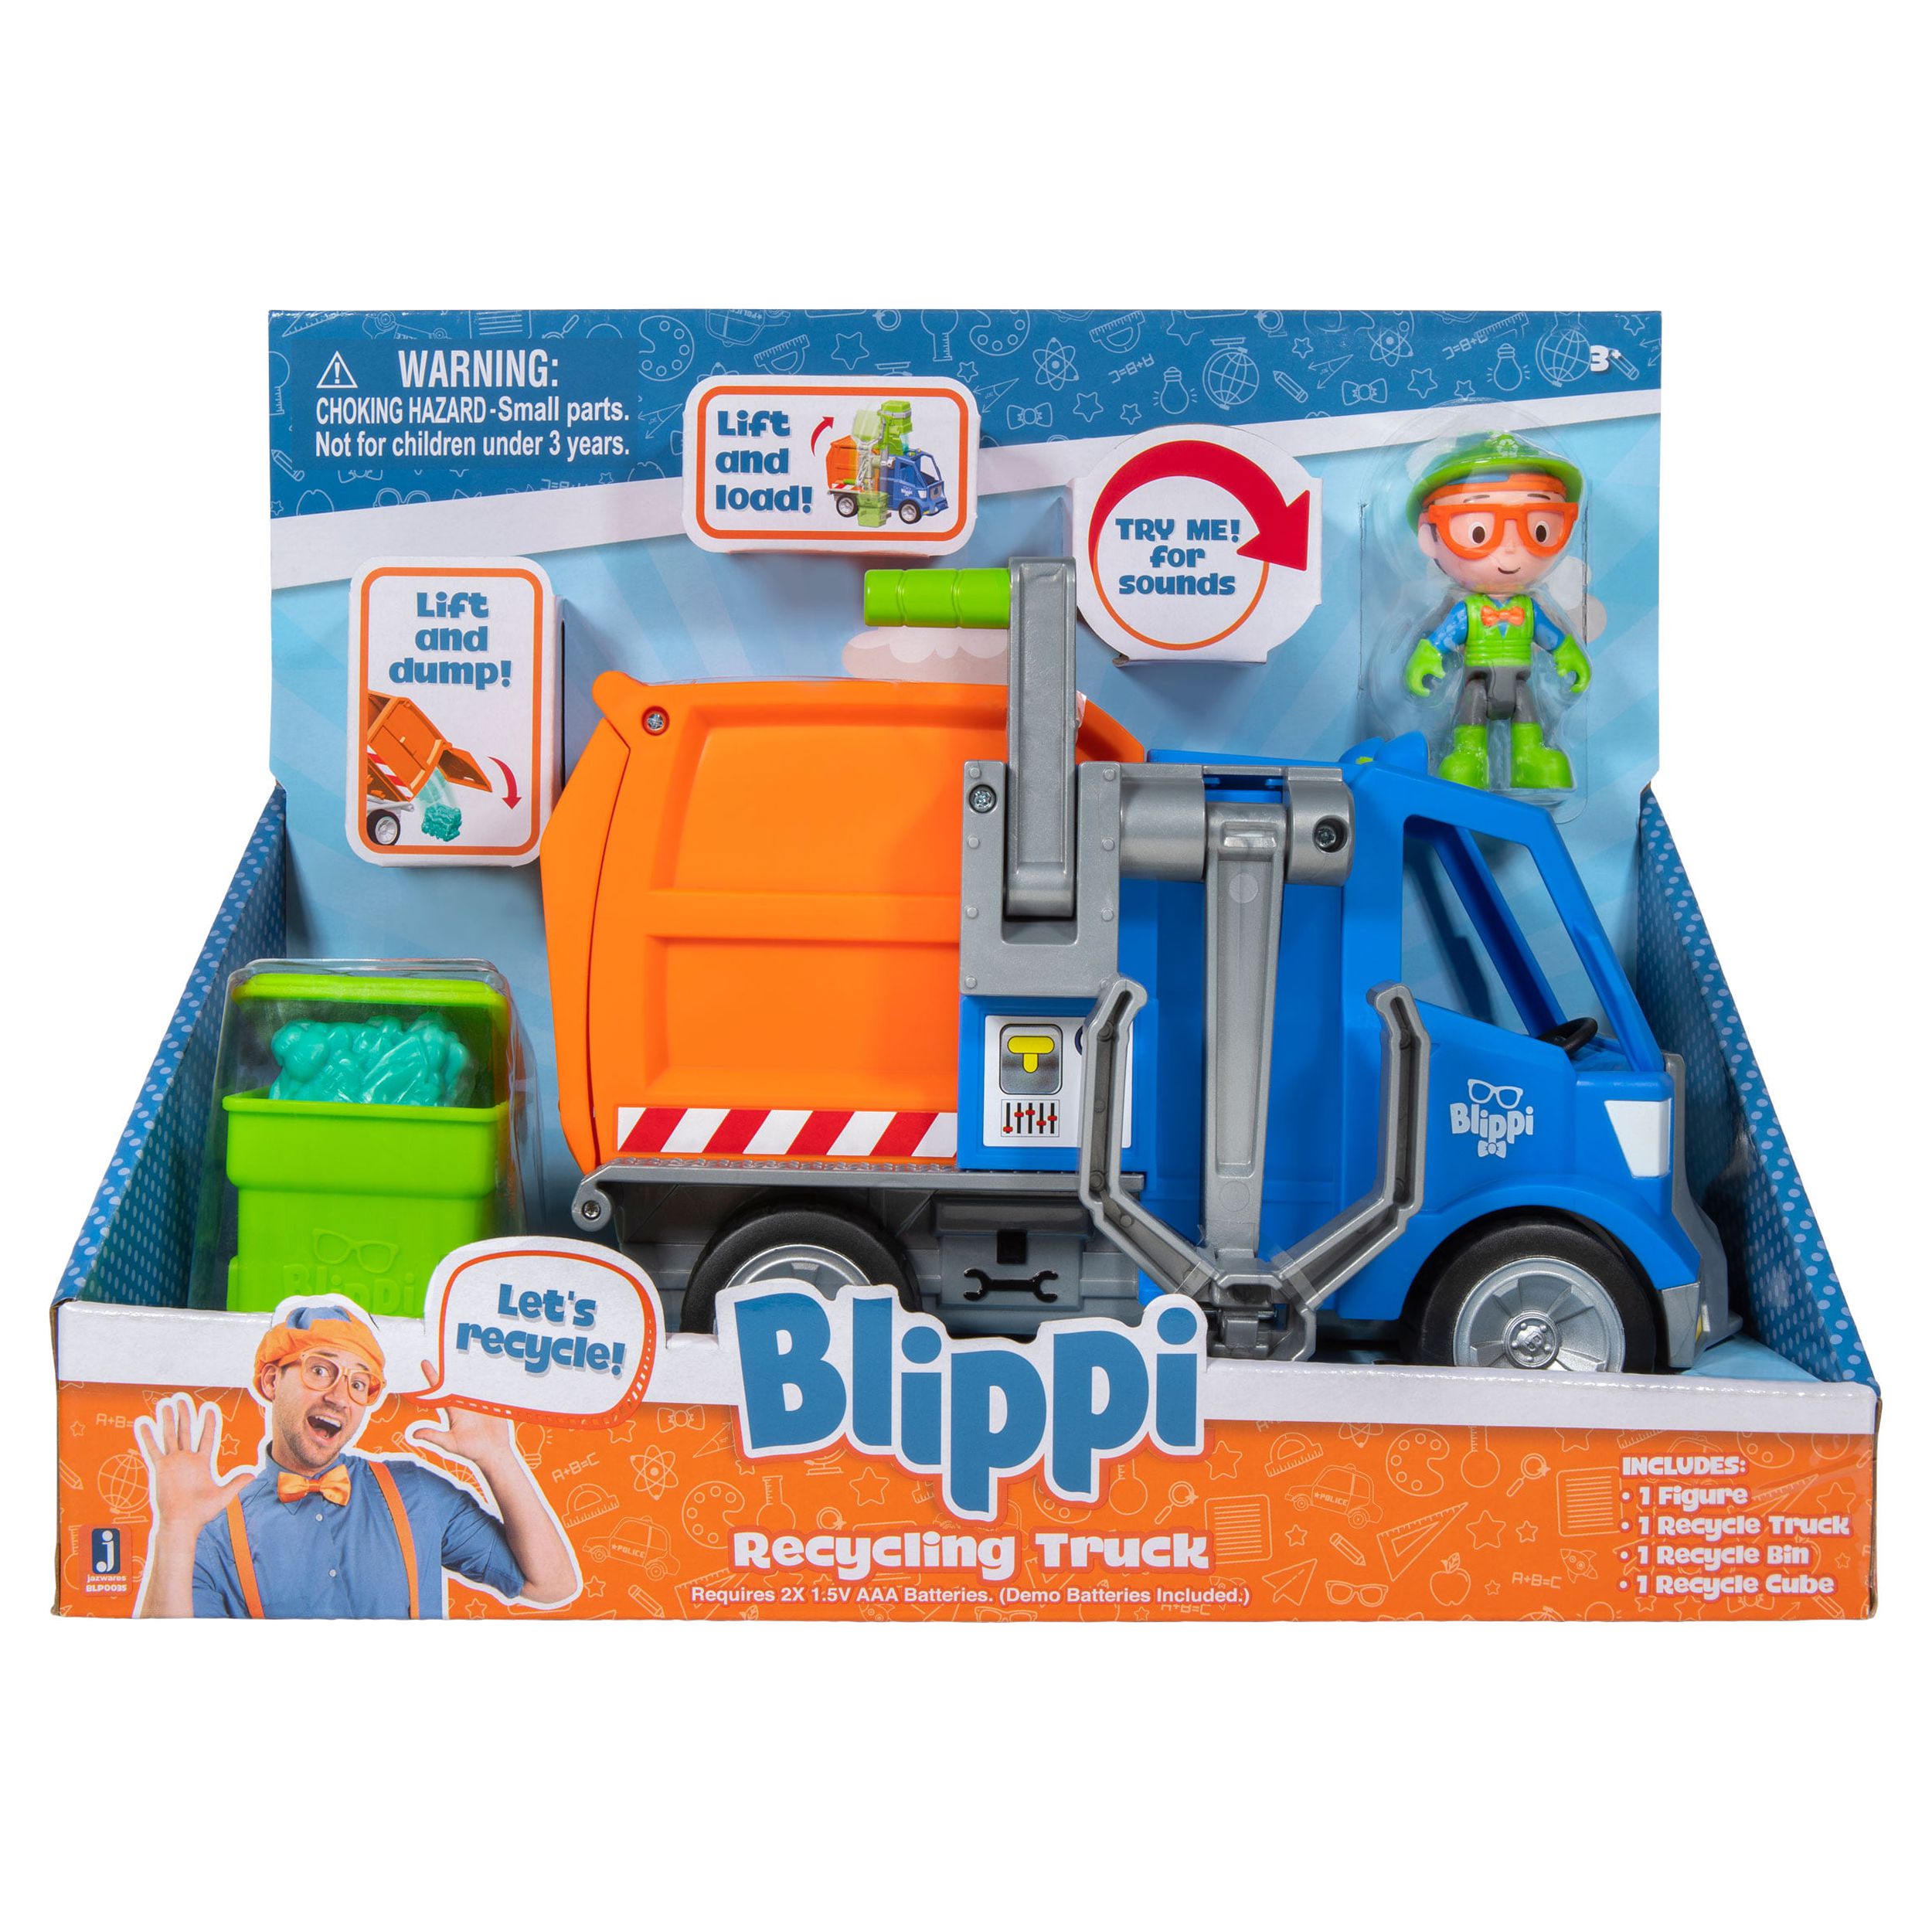 BLIPPI Recycling Truck Play Vehicle - image 4 of 18